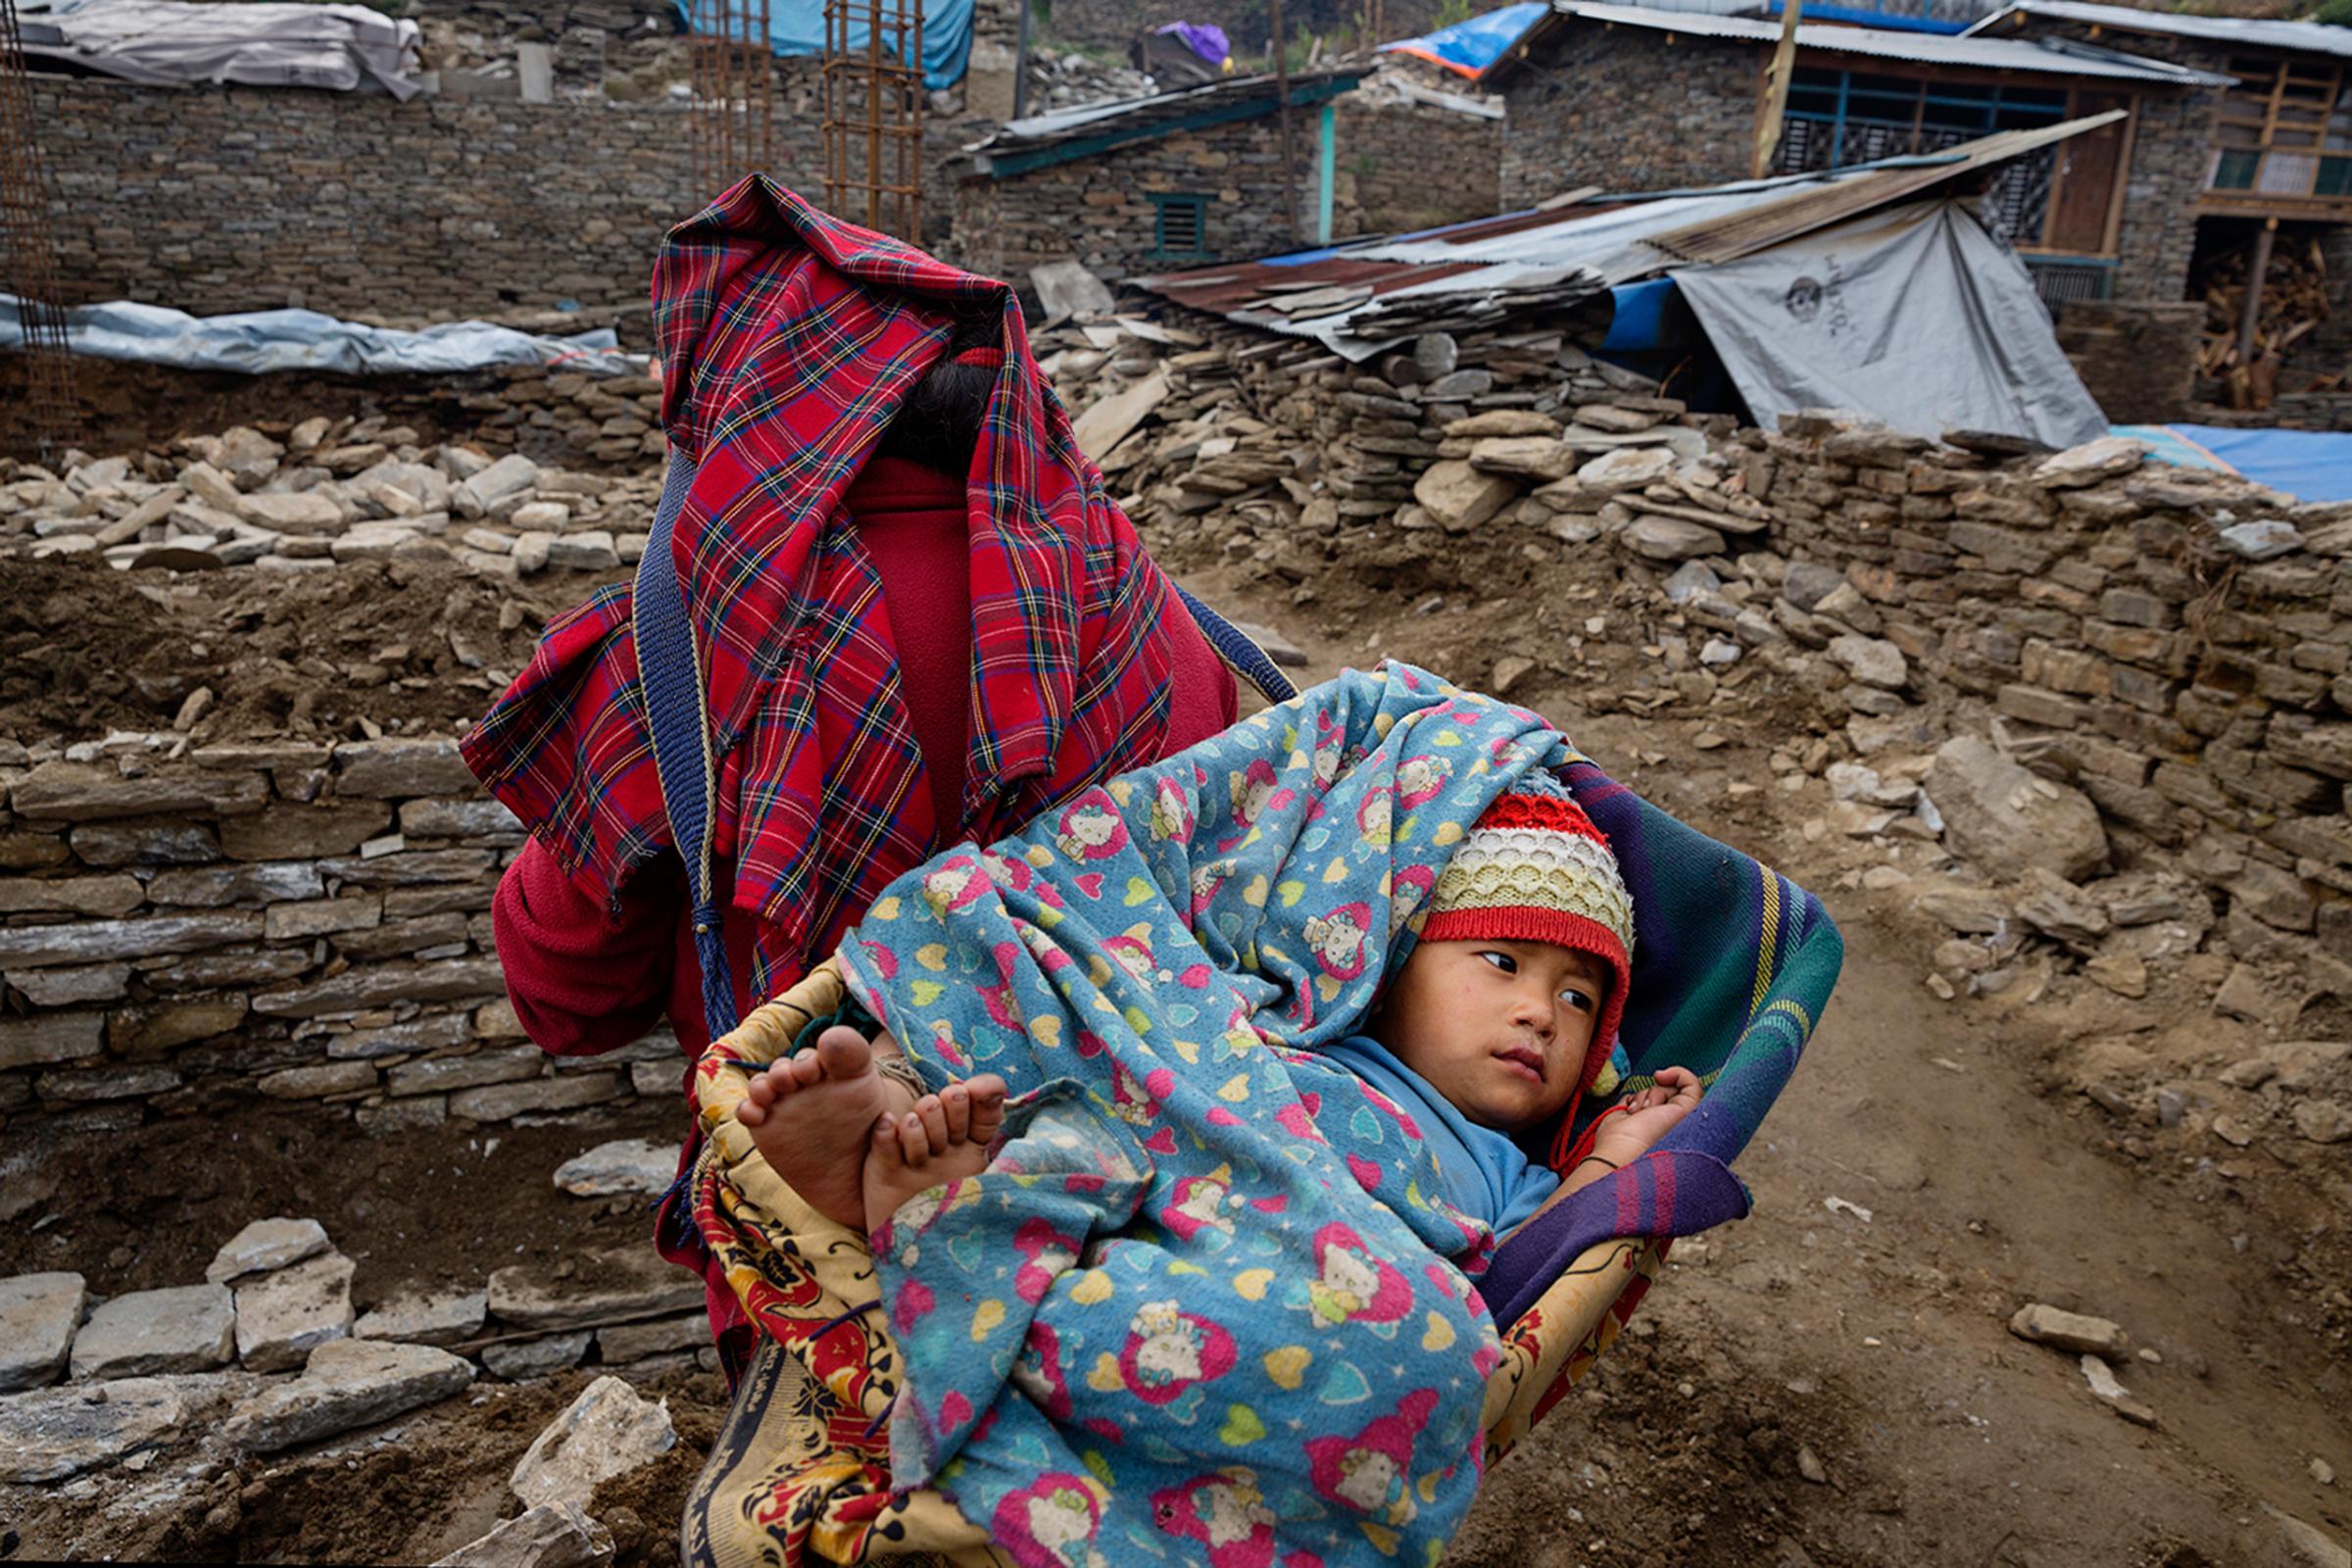 A woman carries a child among wreckage in the village of Barpak, Nepal in Gorkha district, at the epicenter of the 2015 quakes, April 3, 2016.